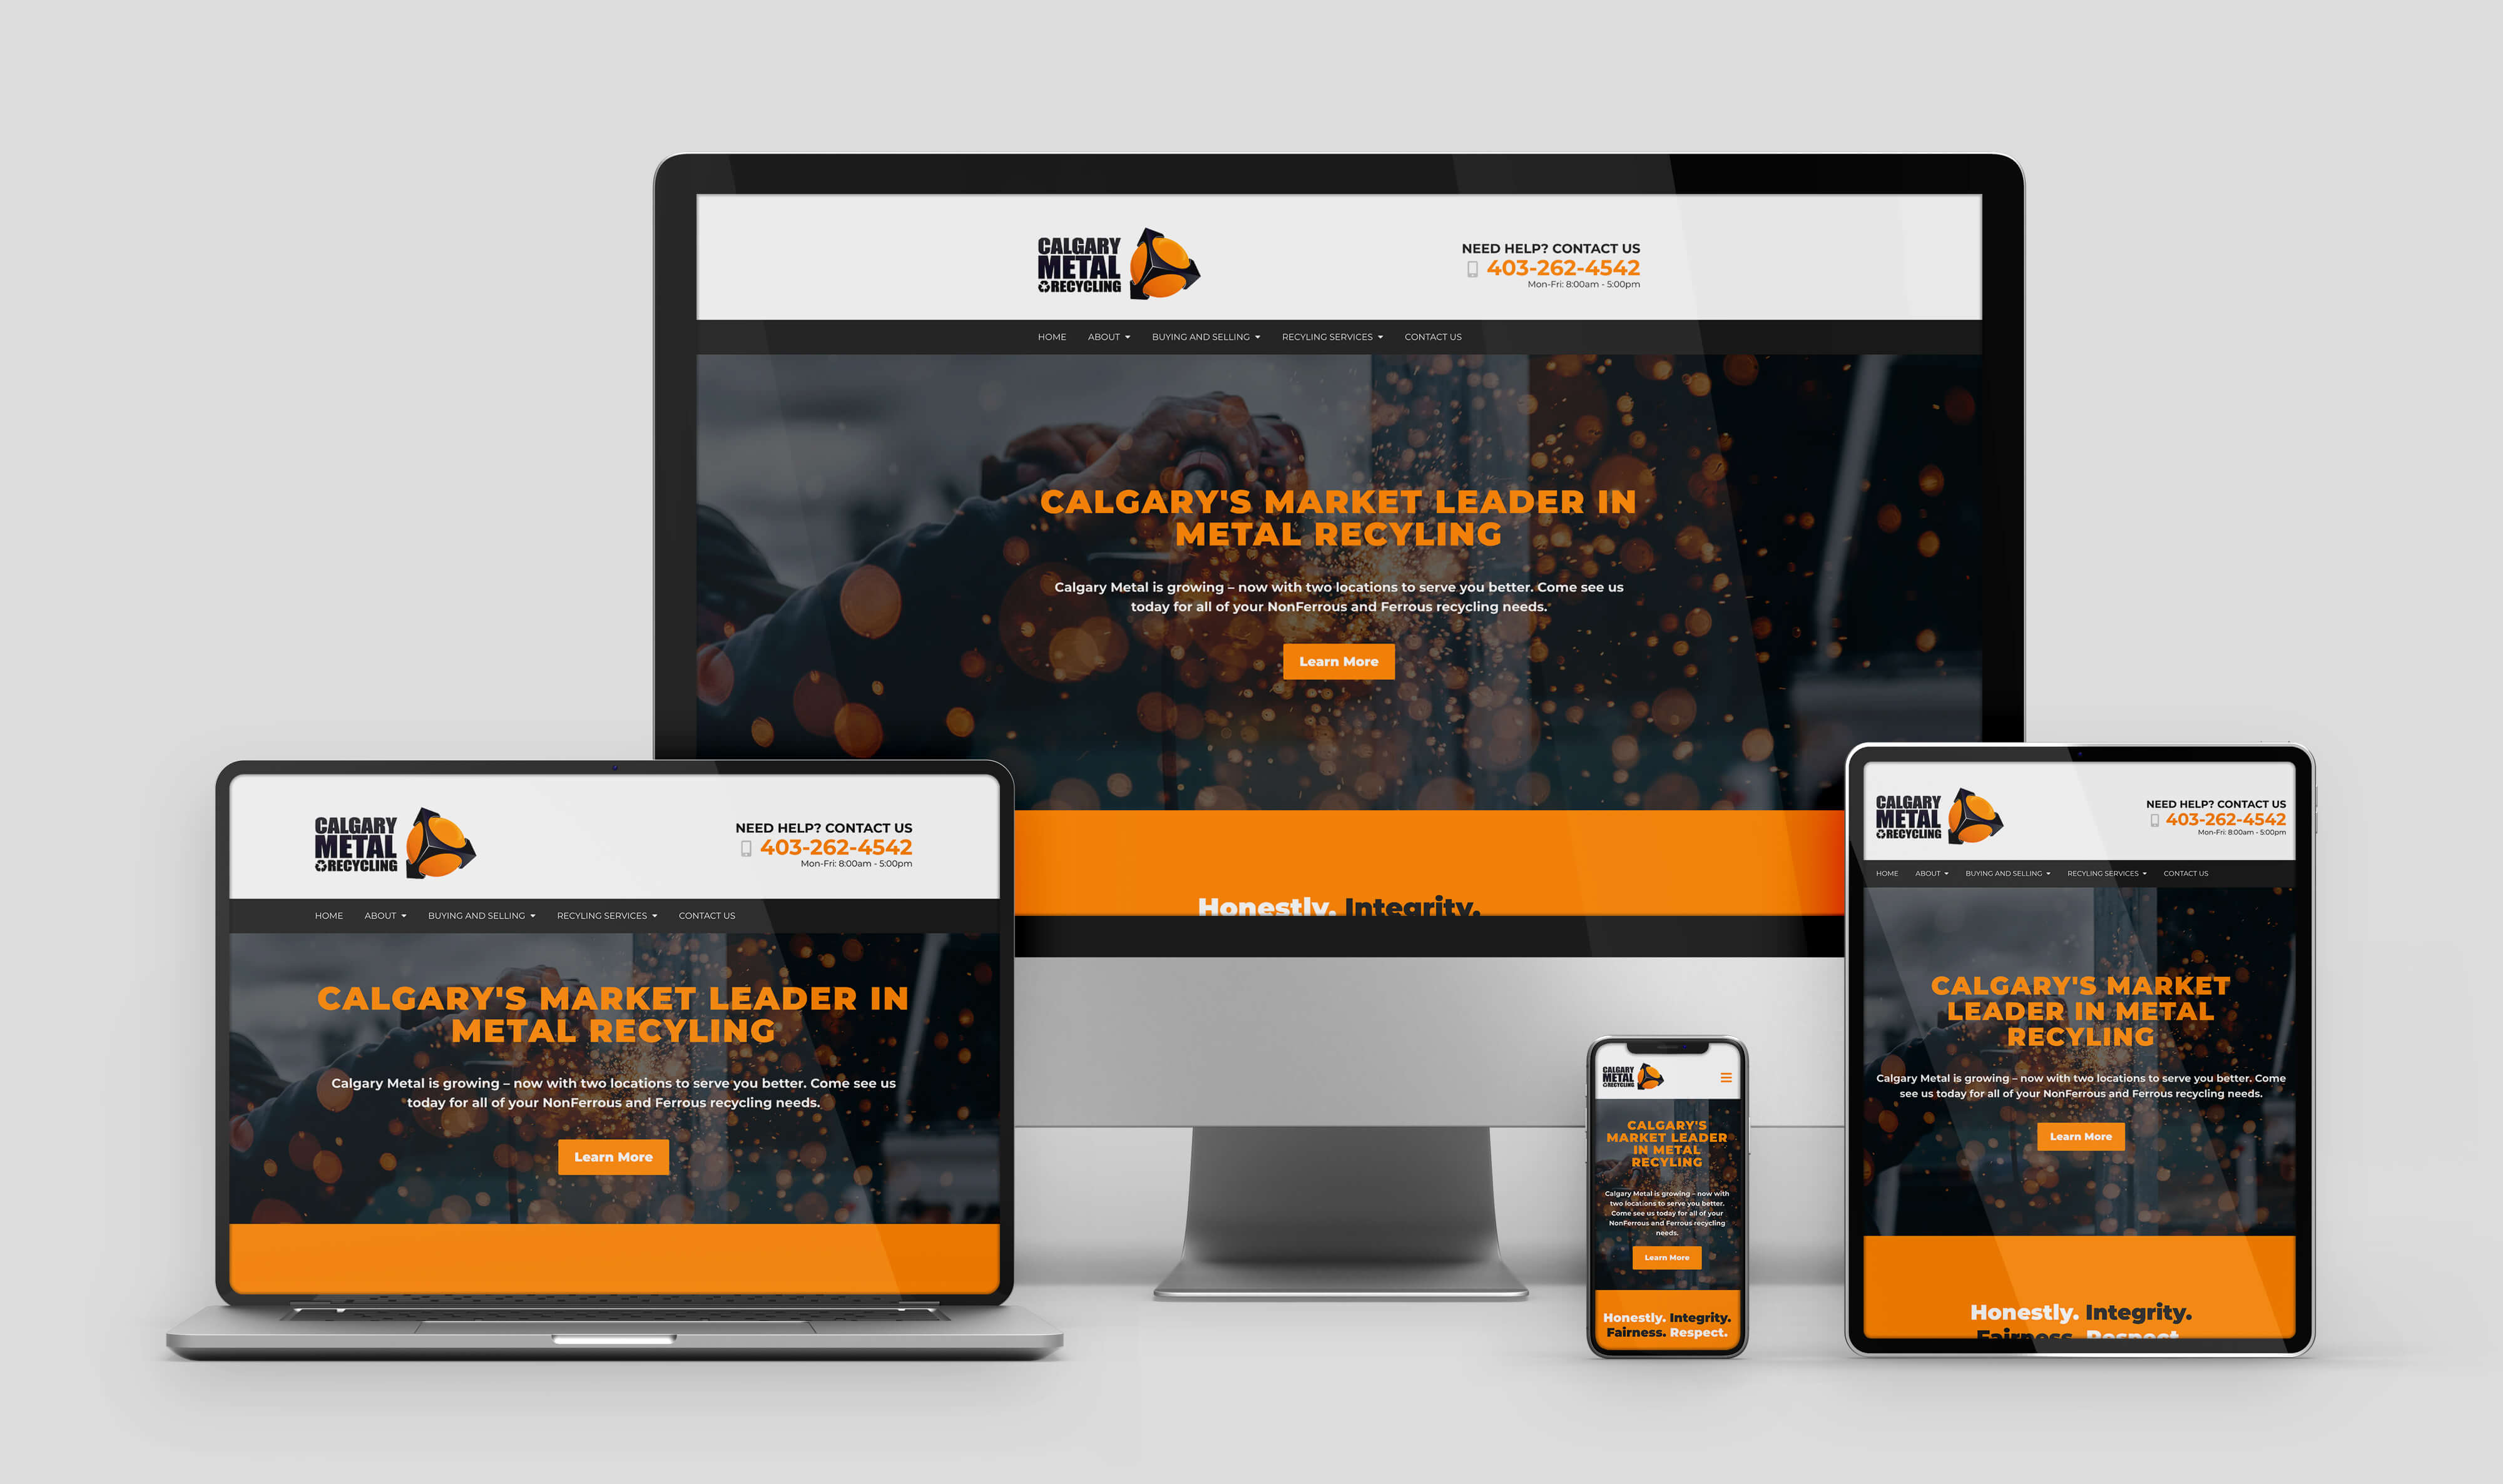 Calgary Metal Recycling Inc design on multiple devices